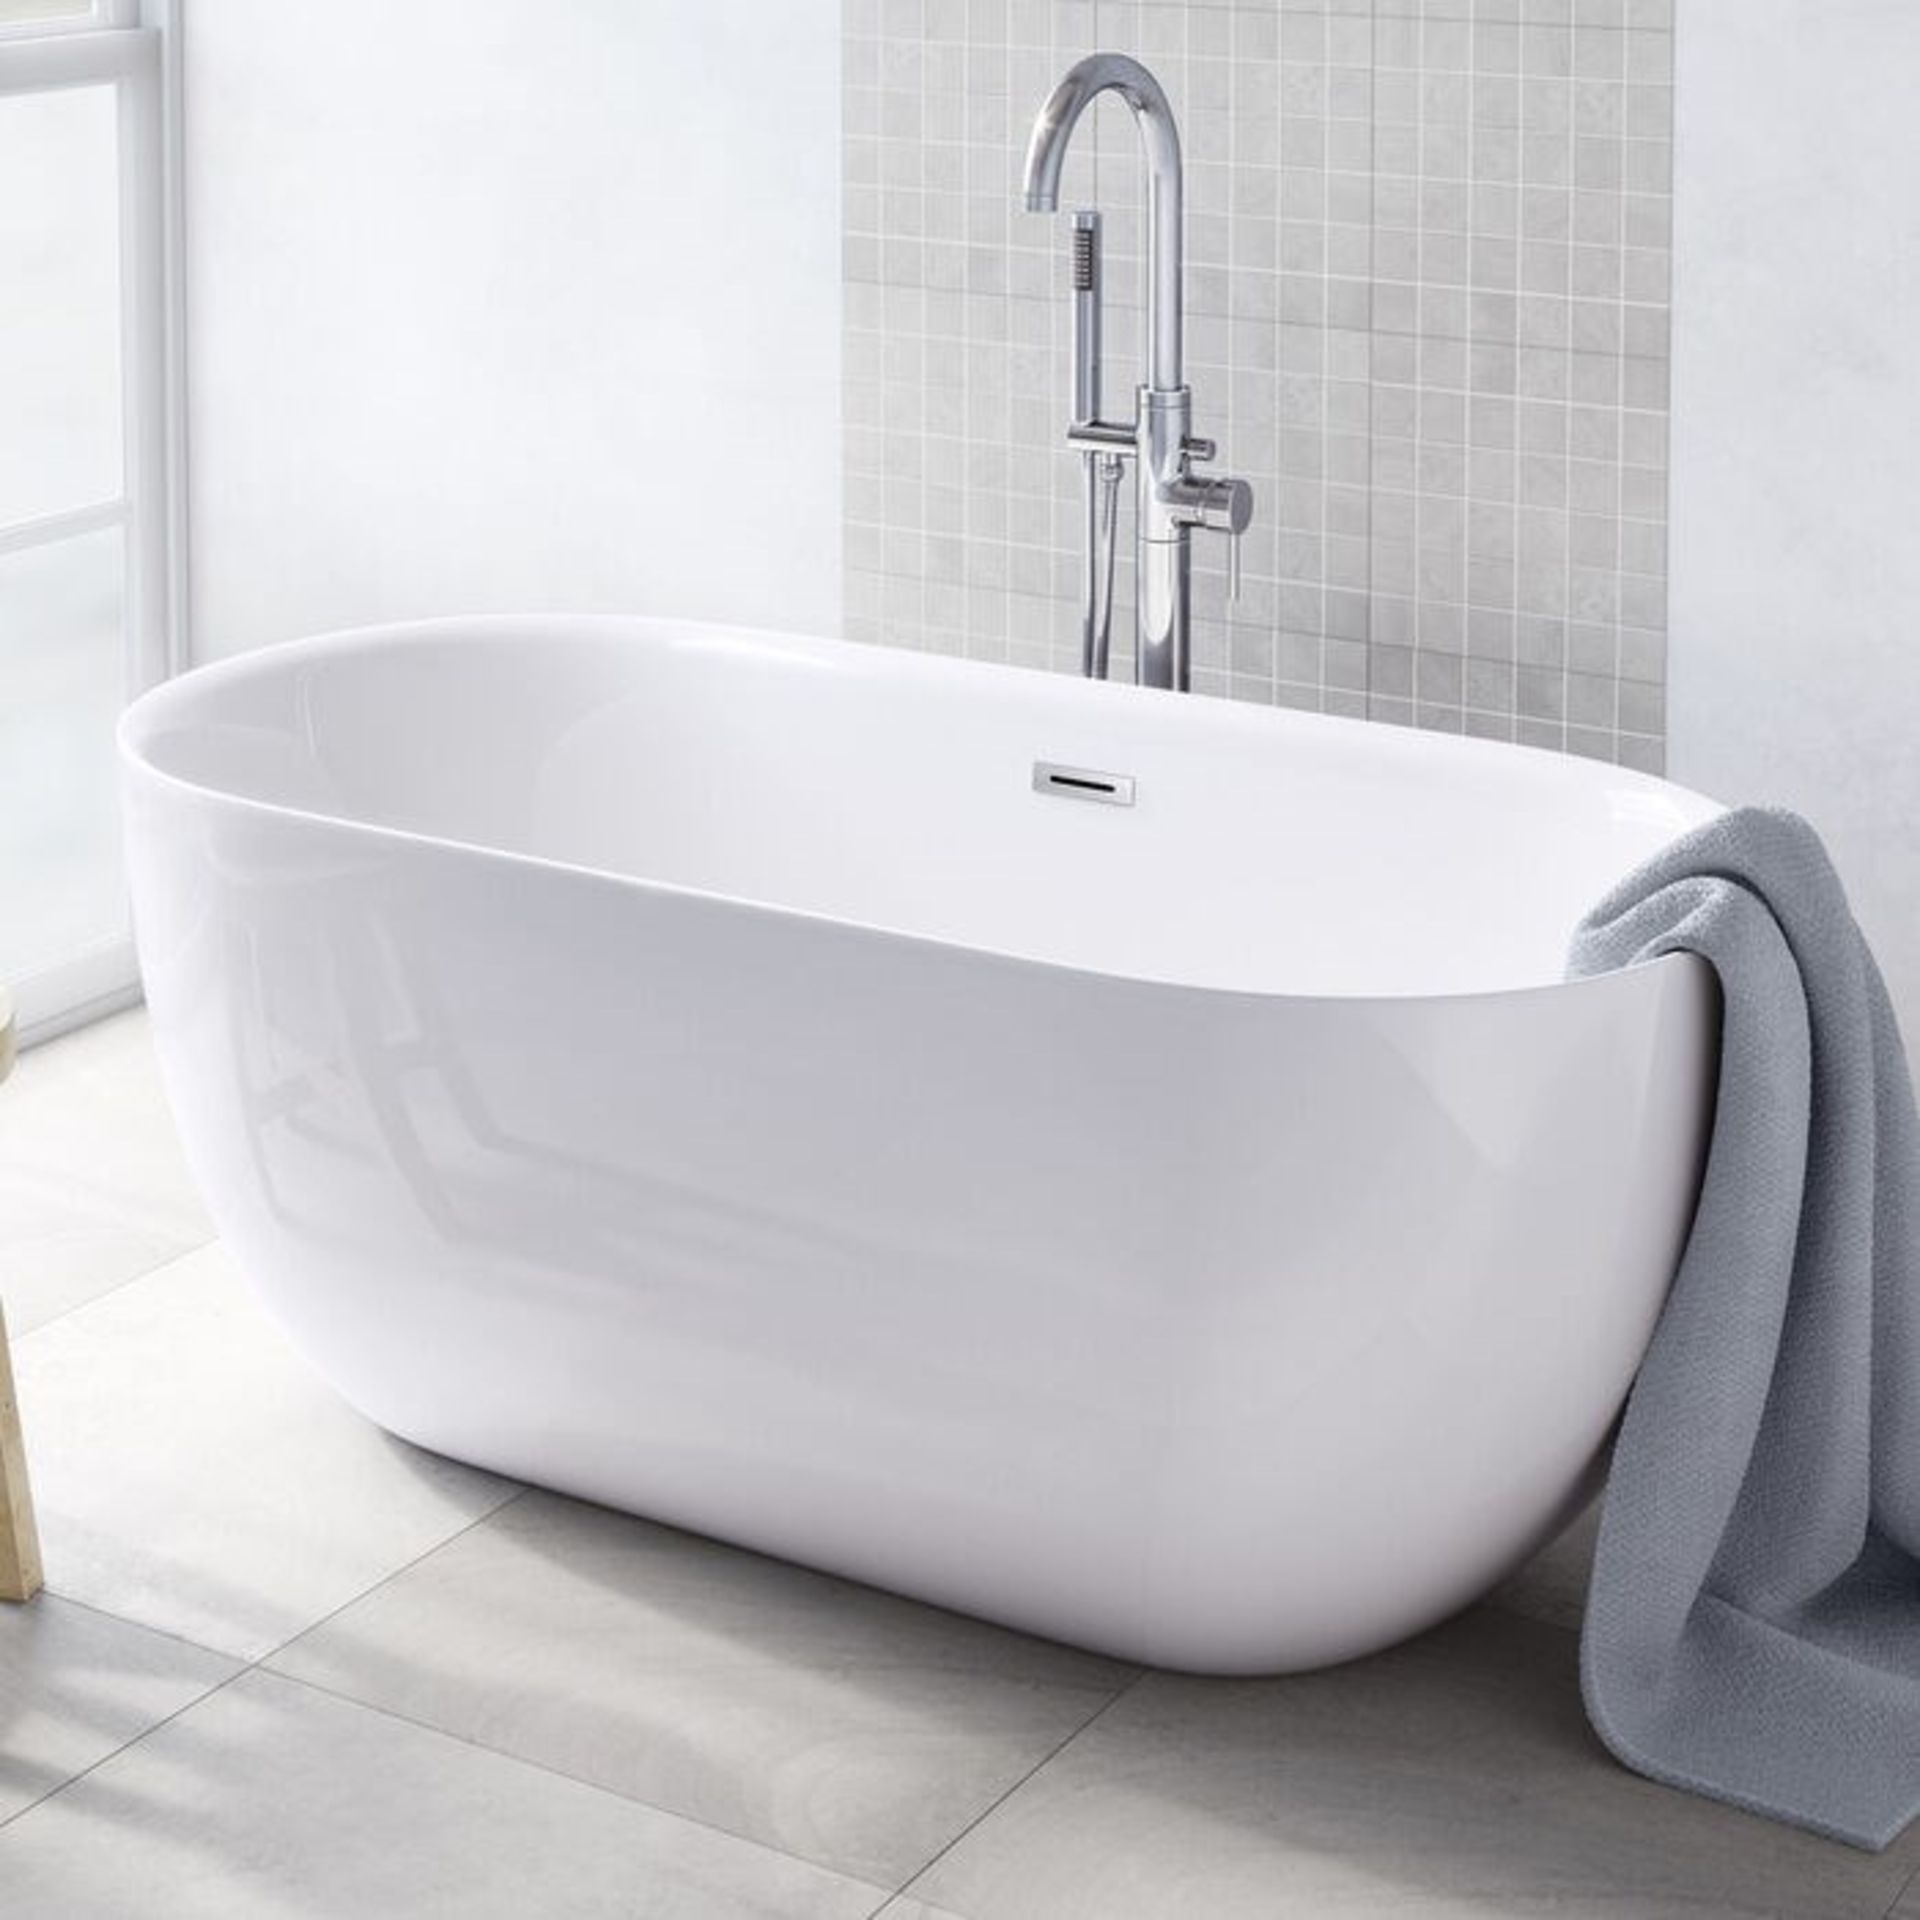 1500x720mm May Freestanding Bath. Manufactured from high quality gloss acrylic for a luxurious...